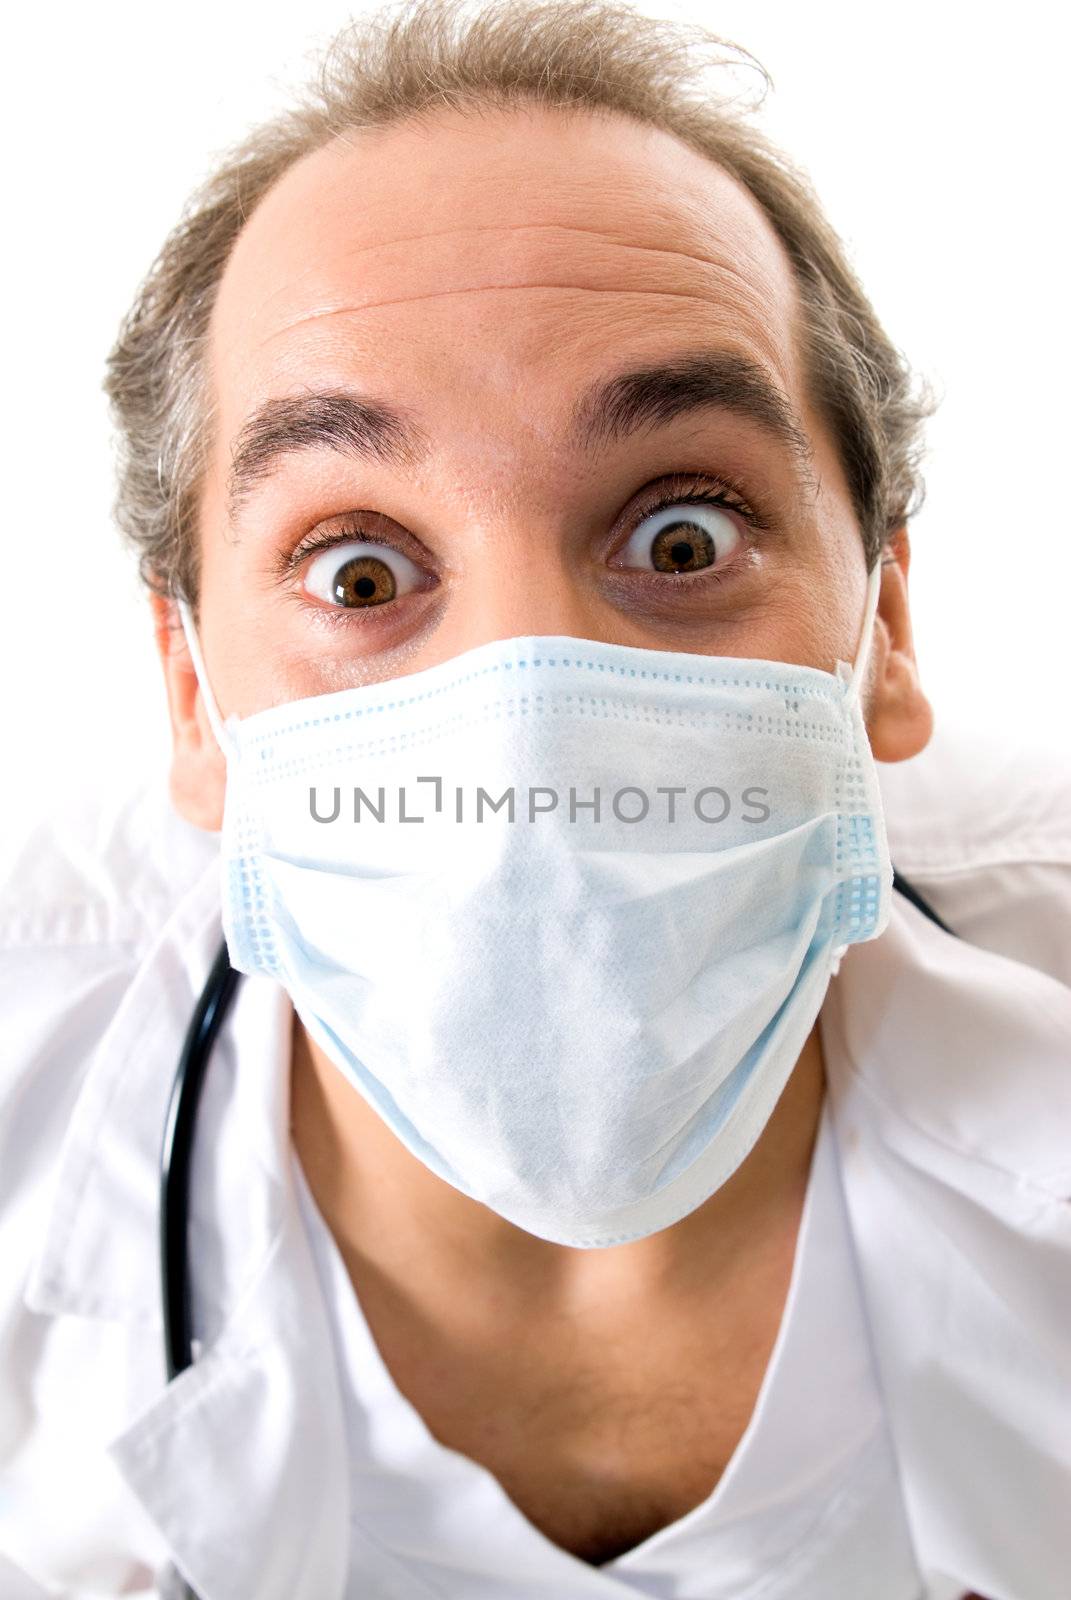 Medic with stethoscope and medical mask on white background. 